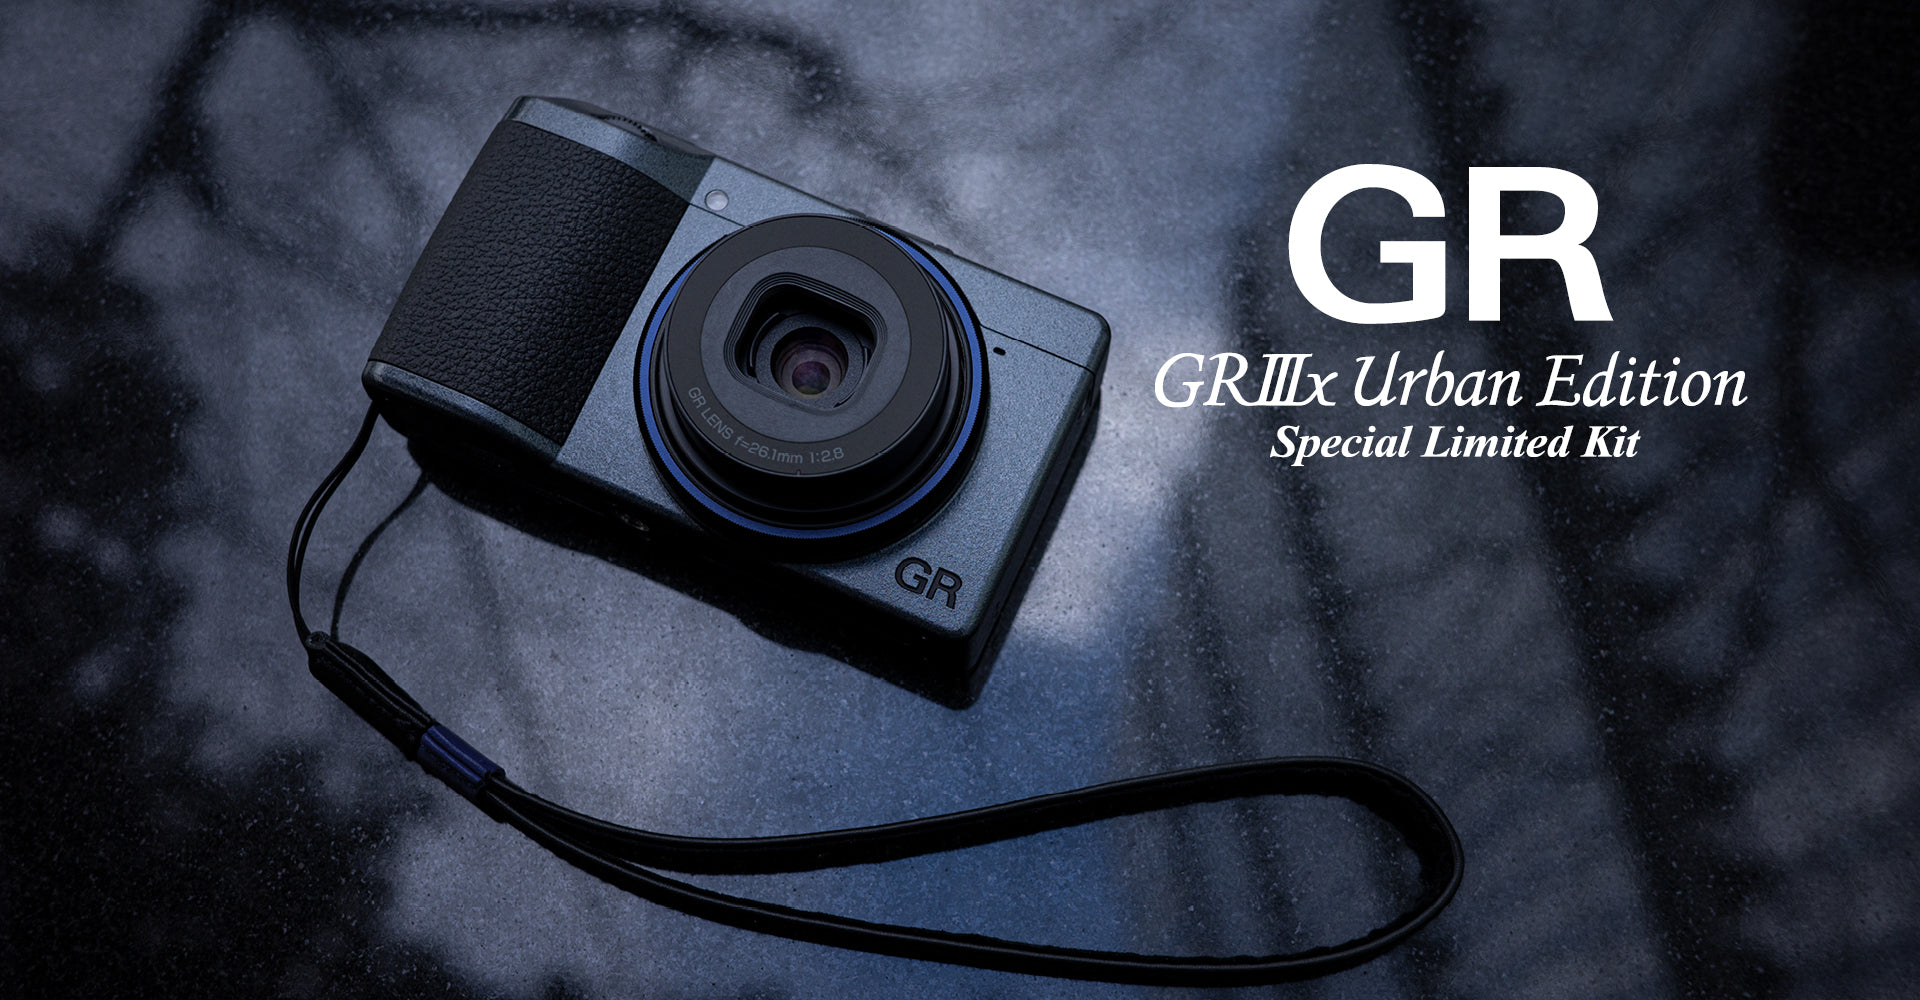 RICOH GR - Always in the Heart of PHOTOGRAPHER